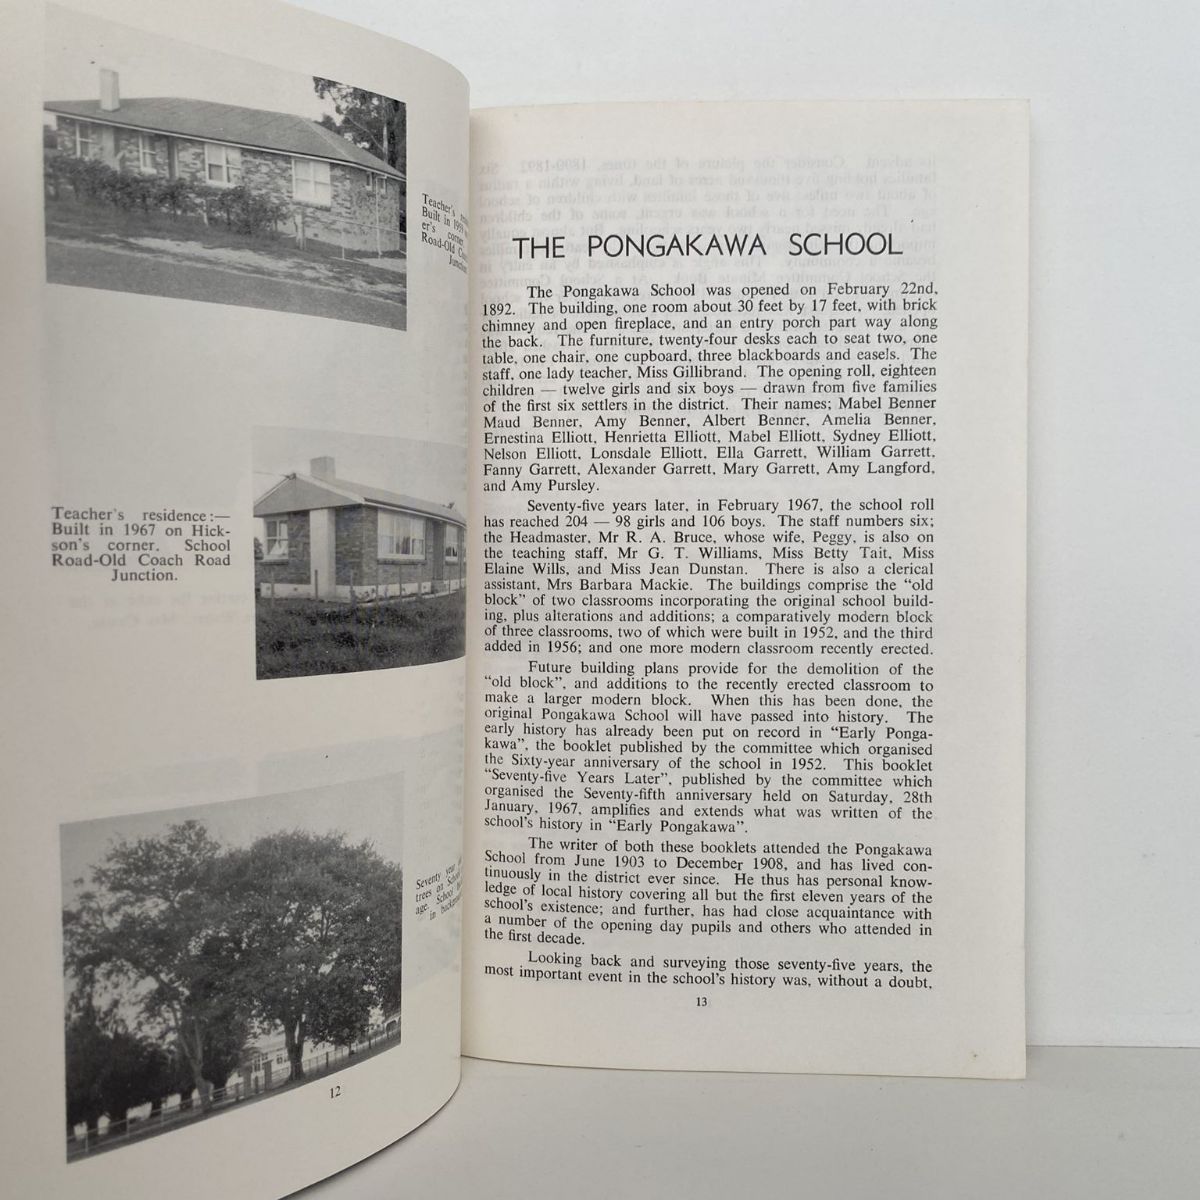 Seventy five Years Later - A History of the Pongakawa School